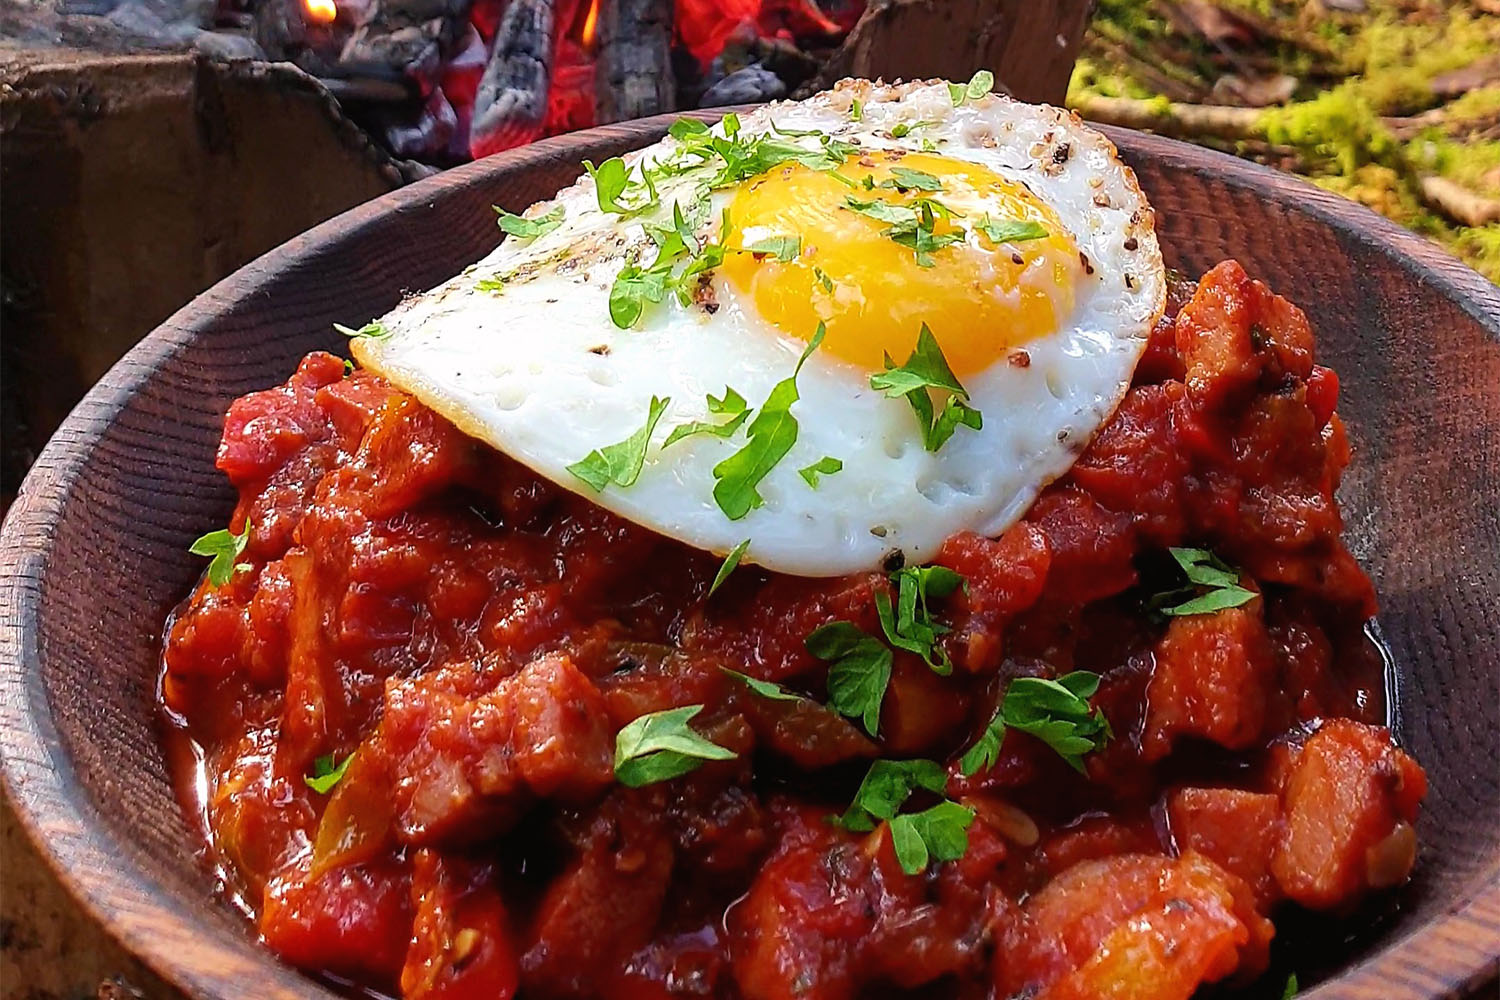 A bowl of cooked meat with an egg on top in a bowl outside.